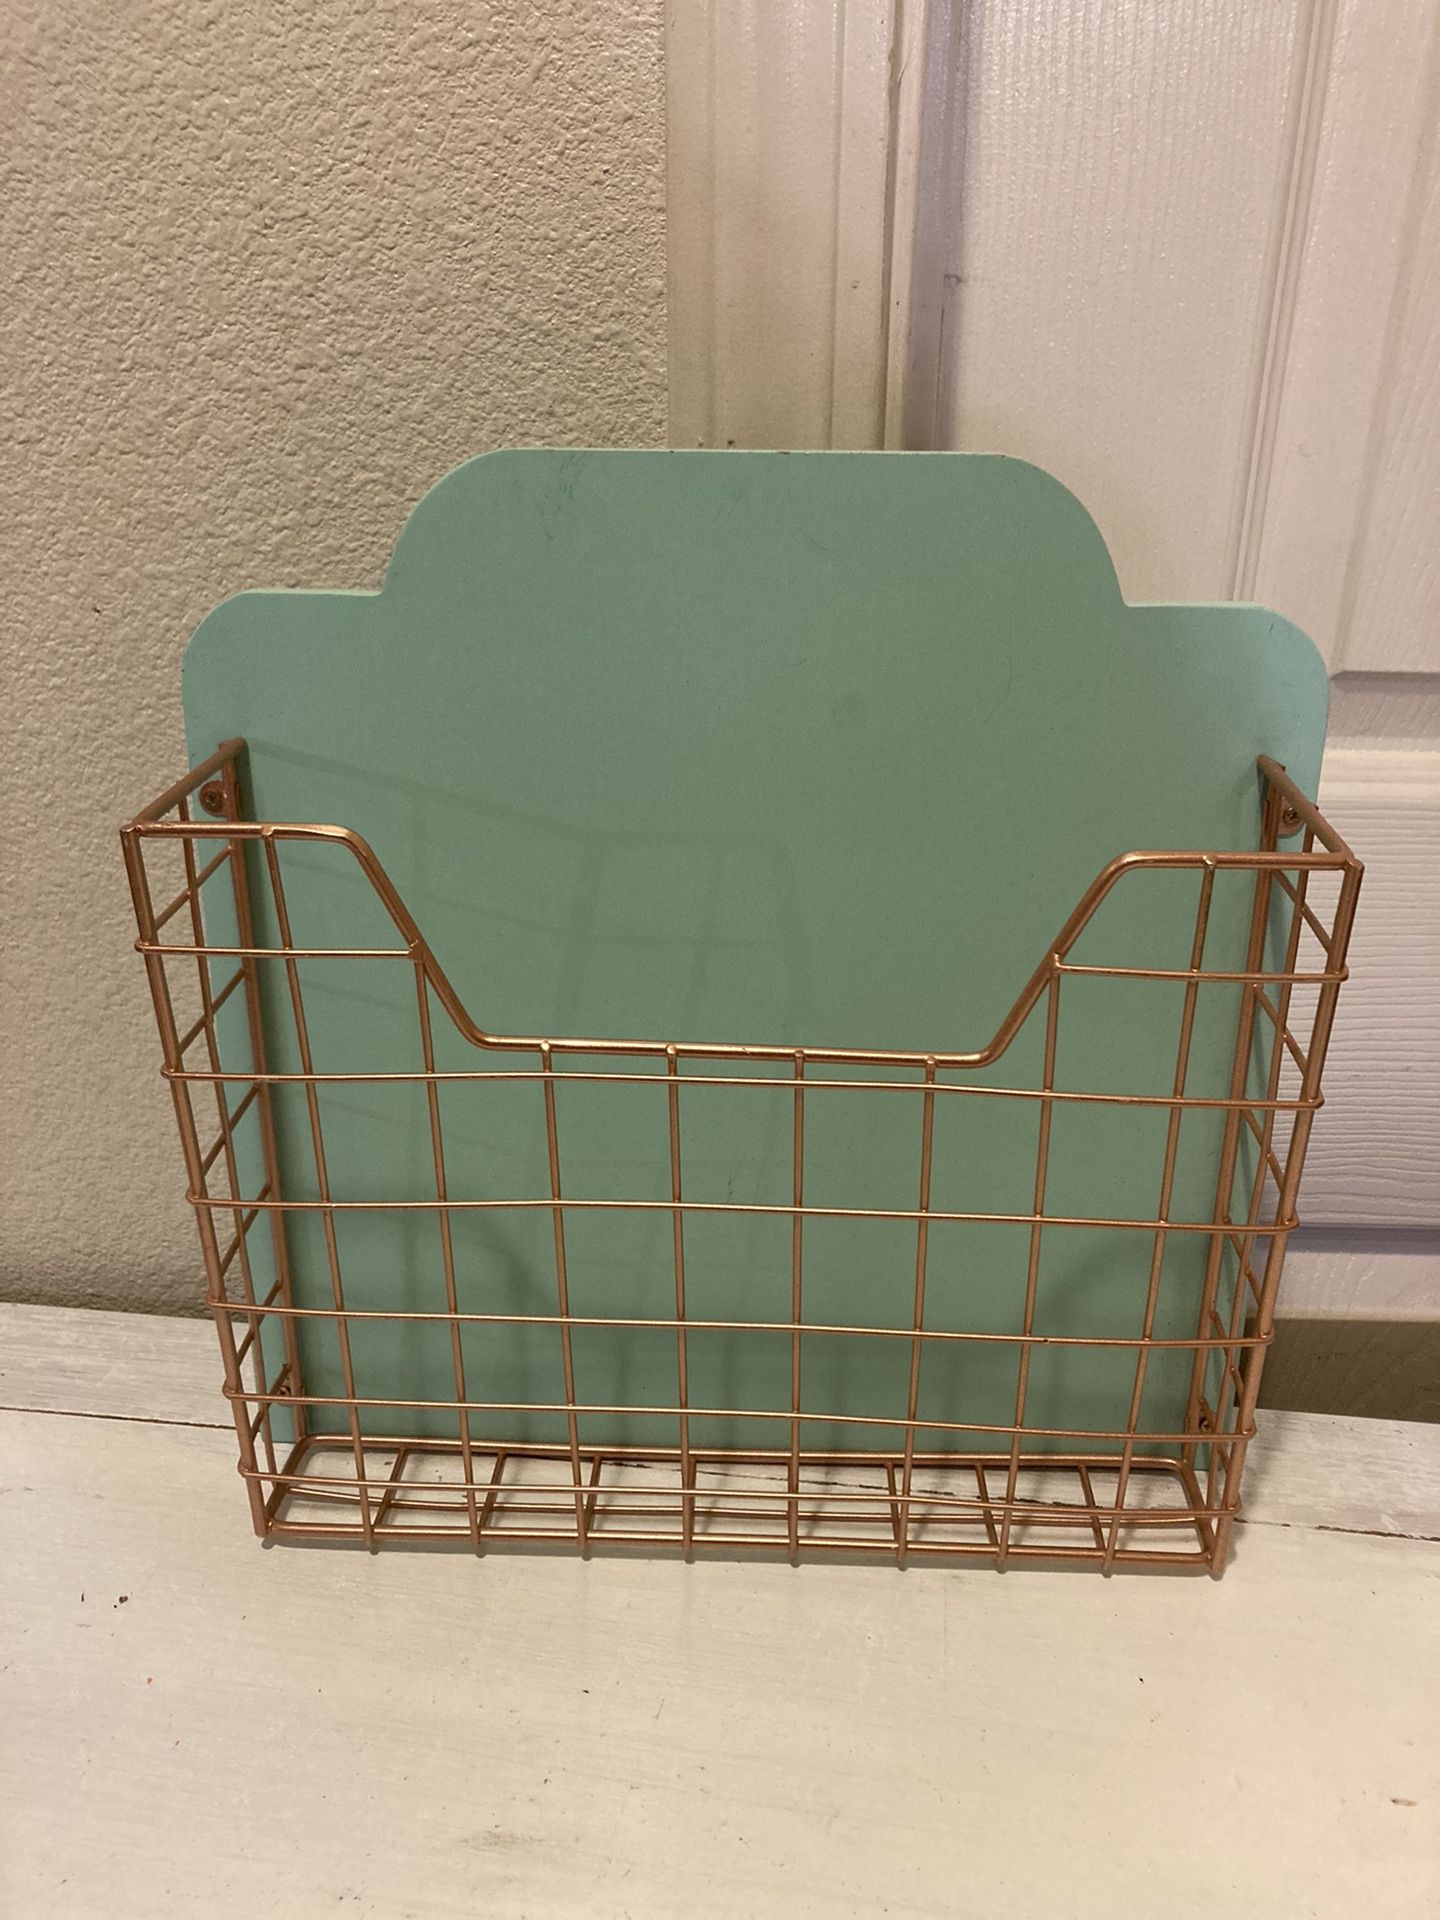 Hanging/standing Mail Caddy/$5